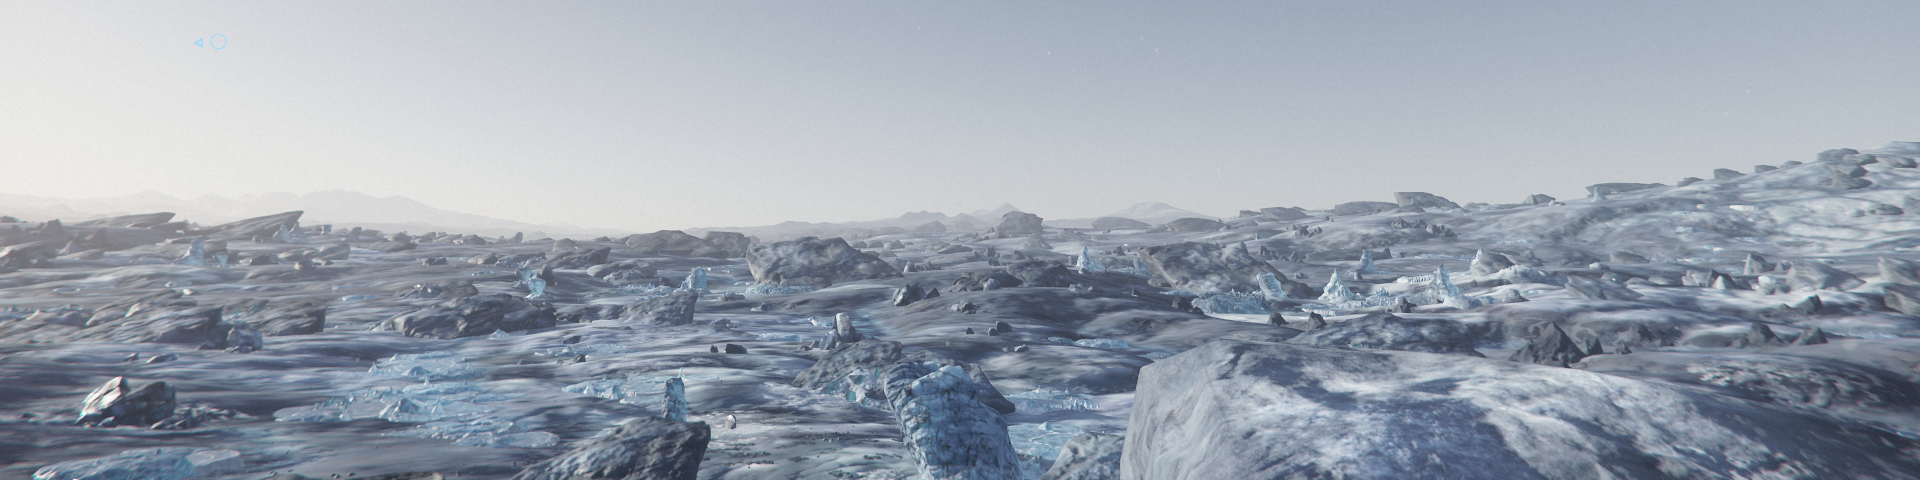 A view of the desolate, broken Lyria icescape; ice ablating in the wind, only to freeze into an icy fog in spite of the sun.